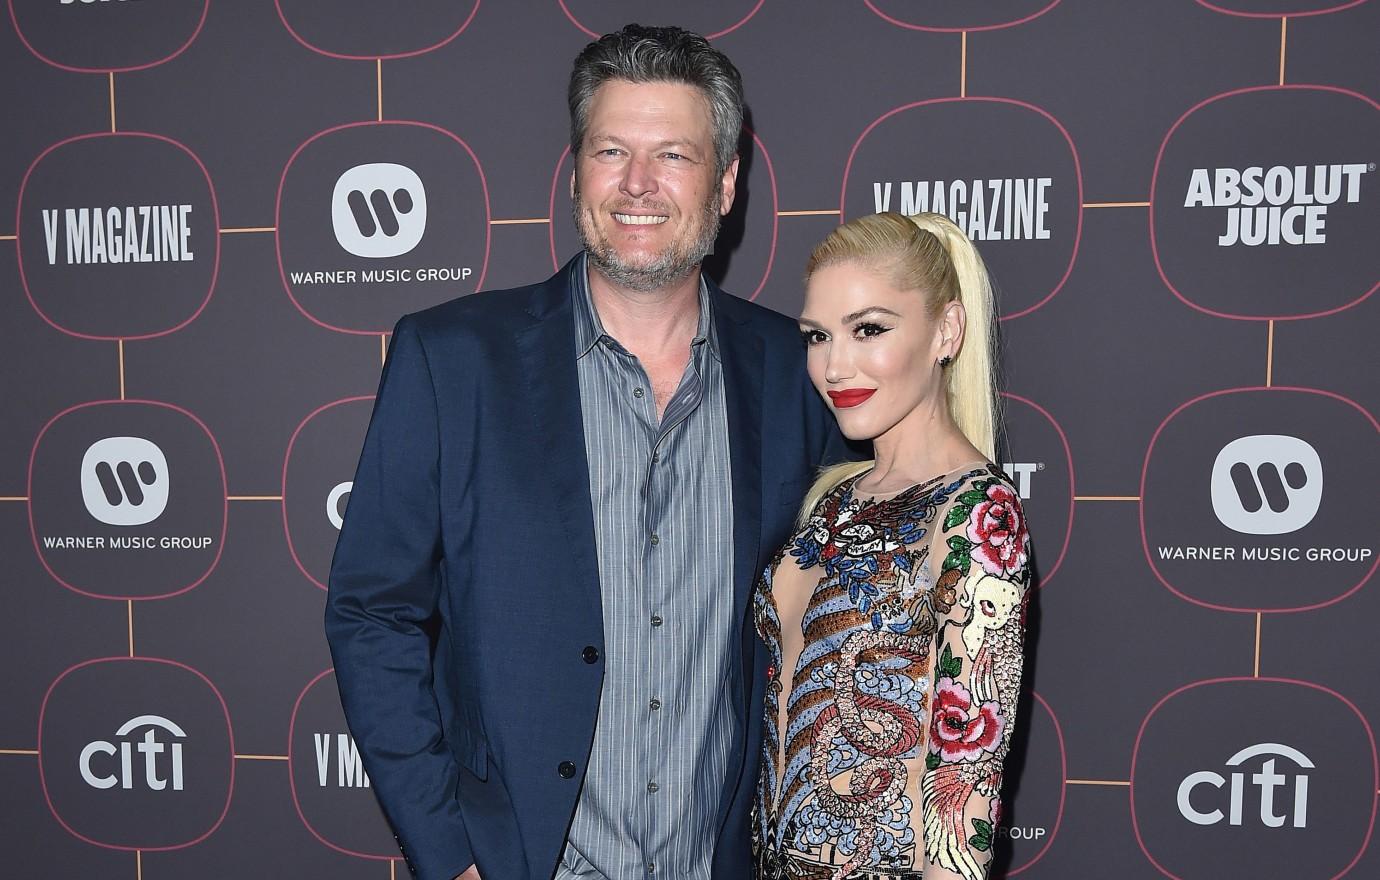 Video Blake Shelton and Gwen Stefani Are All Smiles on Football Date - ABC  News